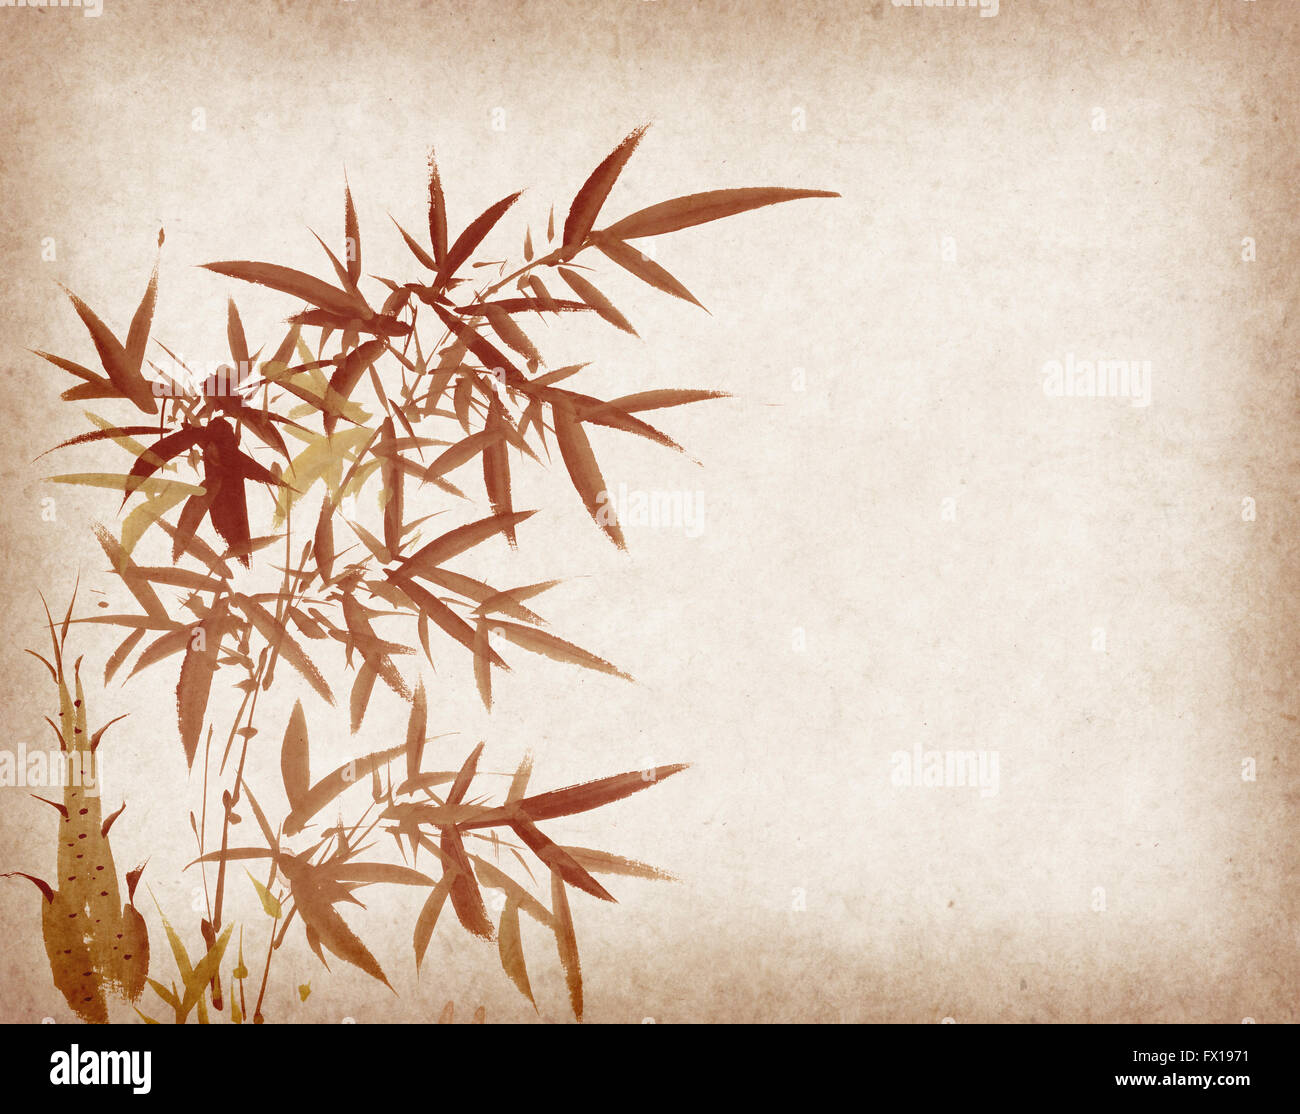 Traditional chinese painting Bamboo on Old antique vintage paper background  Stock Photo - Alamy